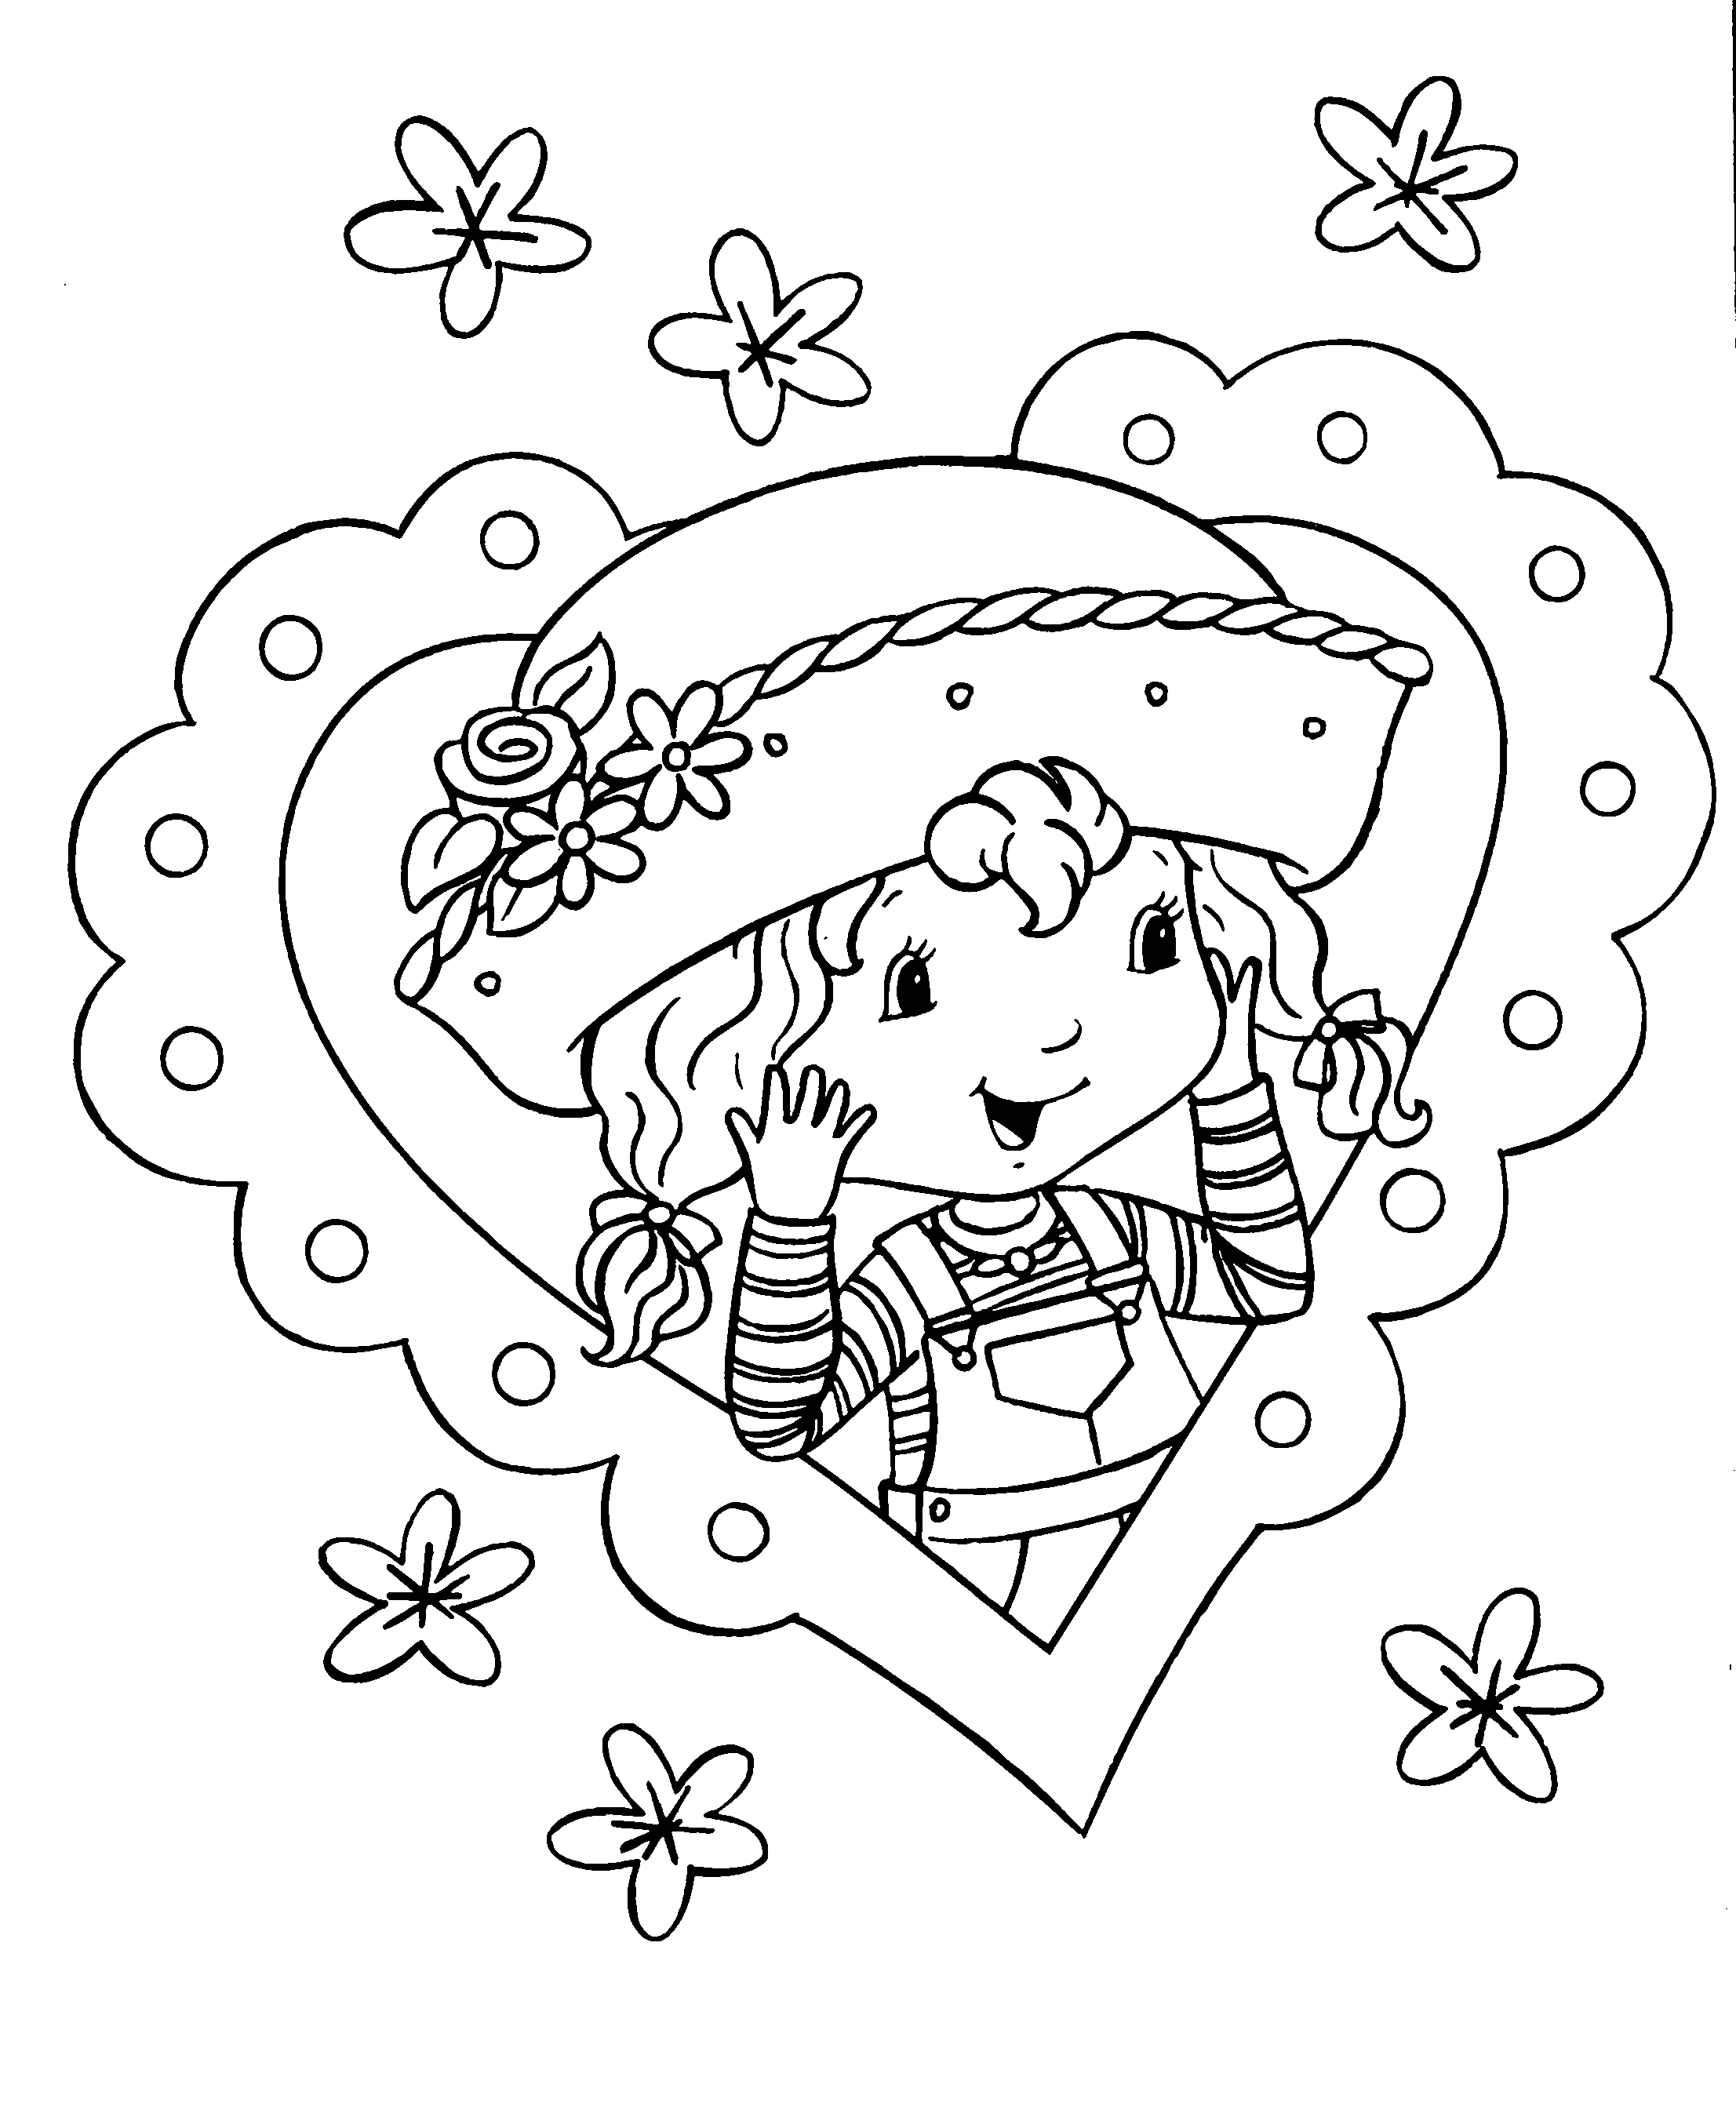 Strawberry shortcake to download Strawberry Shortcake Kids Coloring Pages